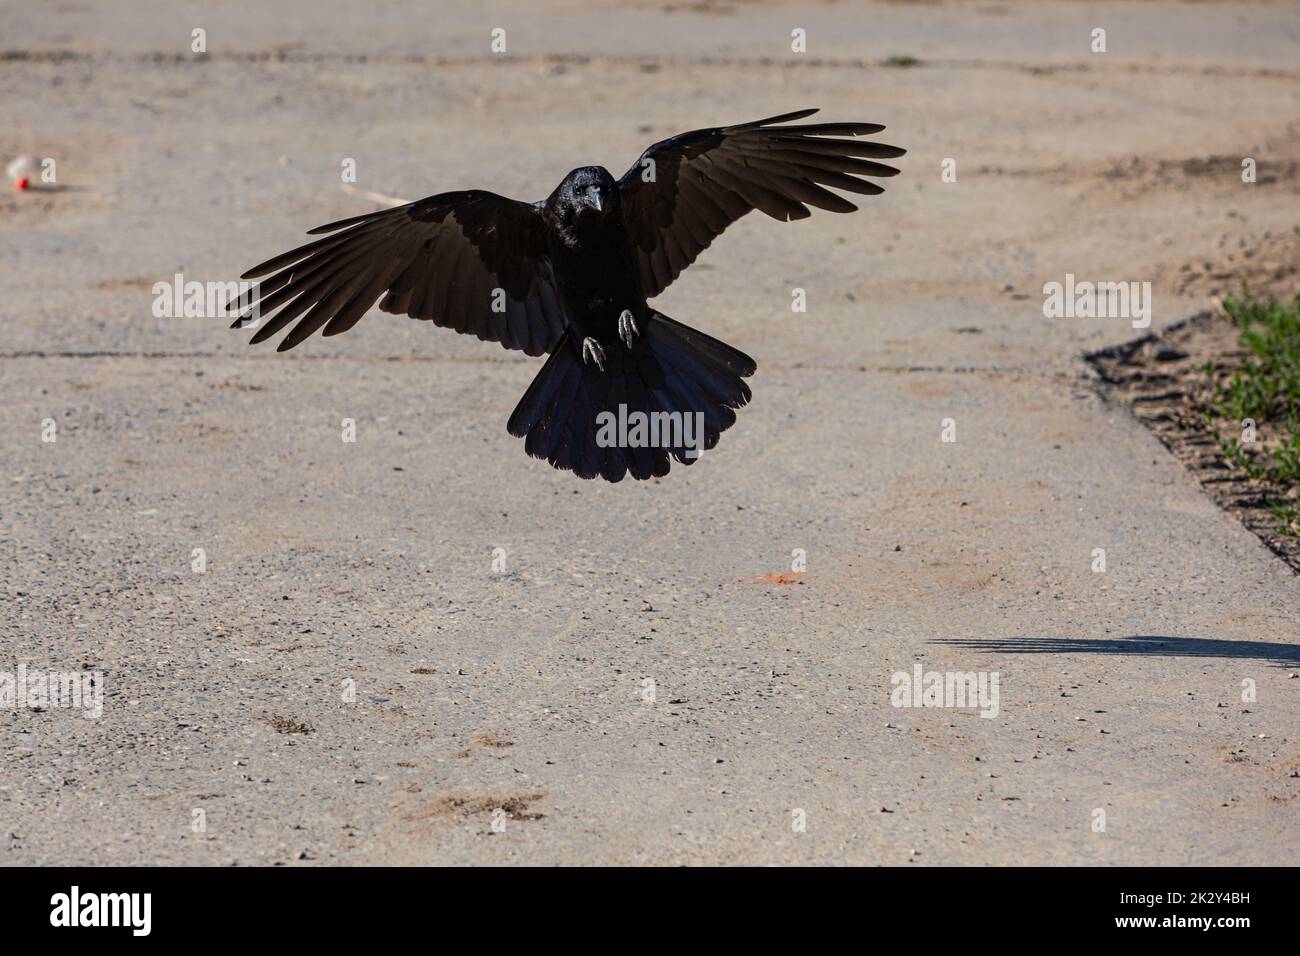 crow landing with spread wings Stock Photo